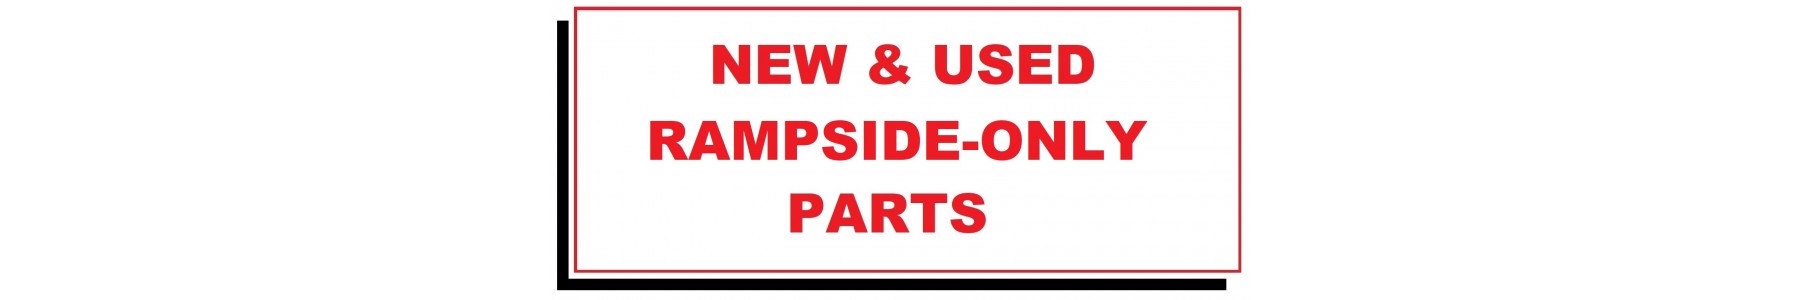 USED RAMPSIDE-ONLY PARTS